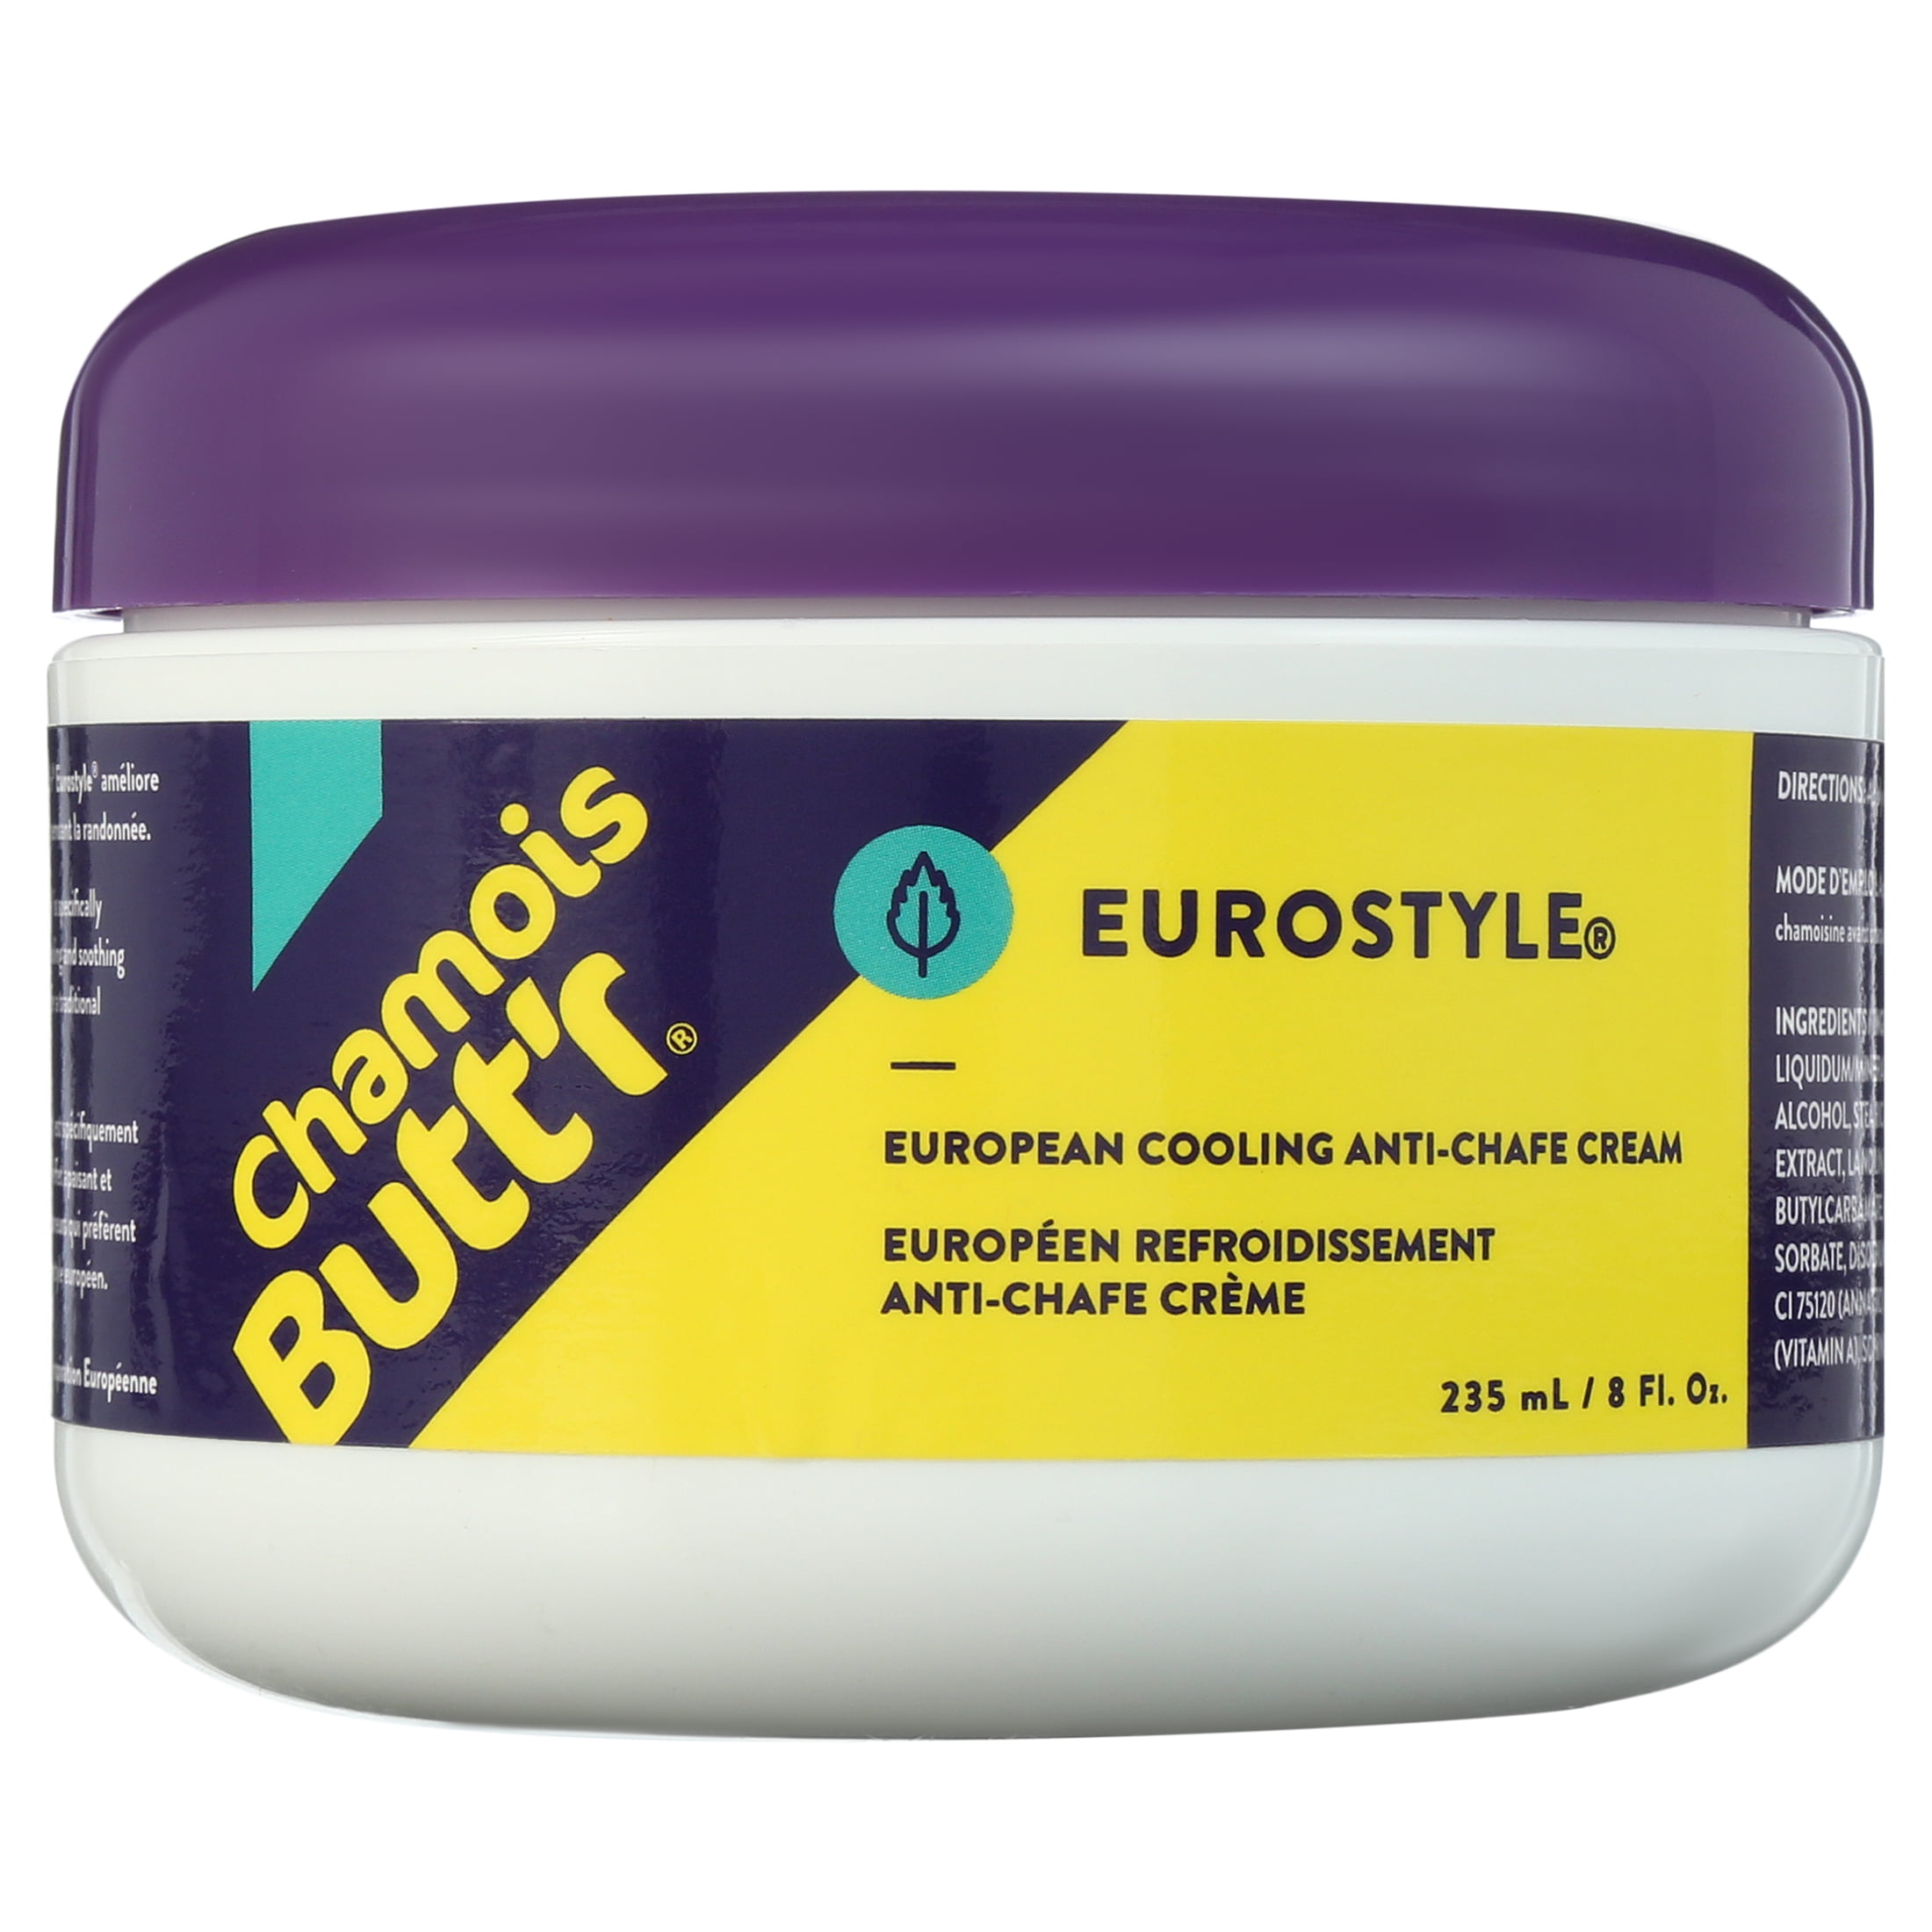 Paceline Products Chamois Butt'r Eurostyle Creme - Men